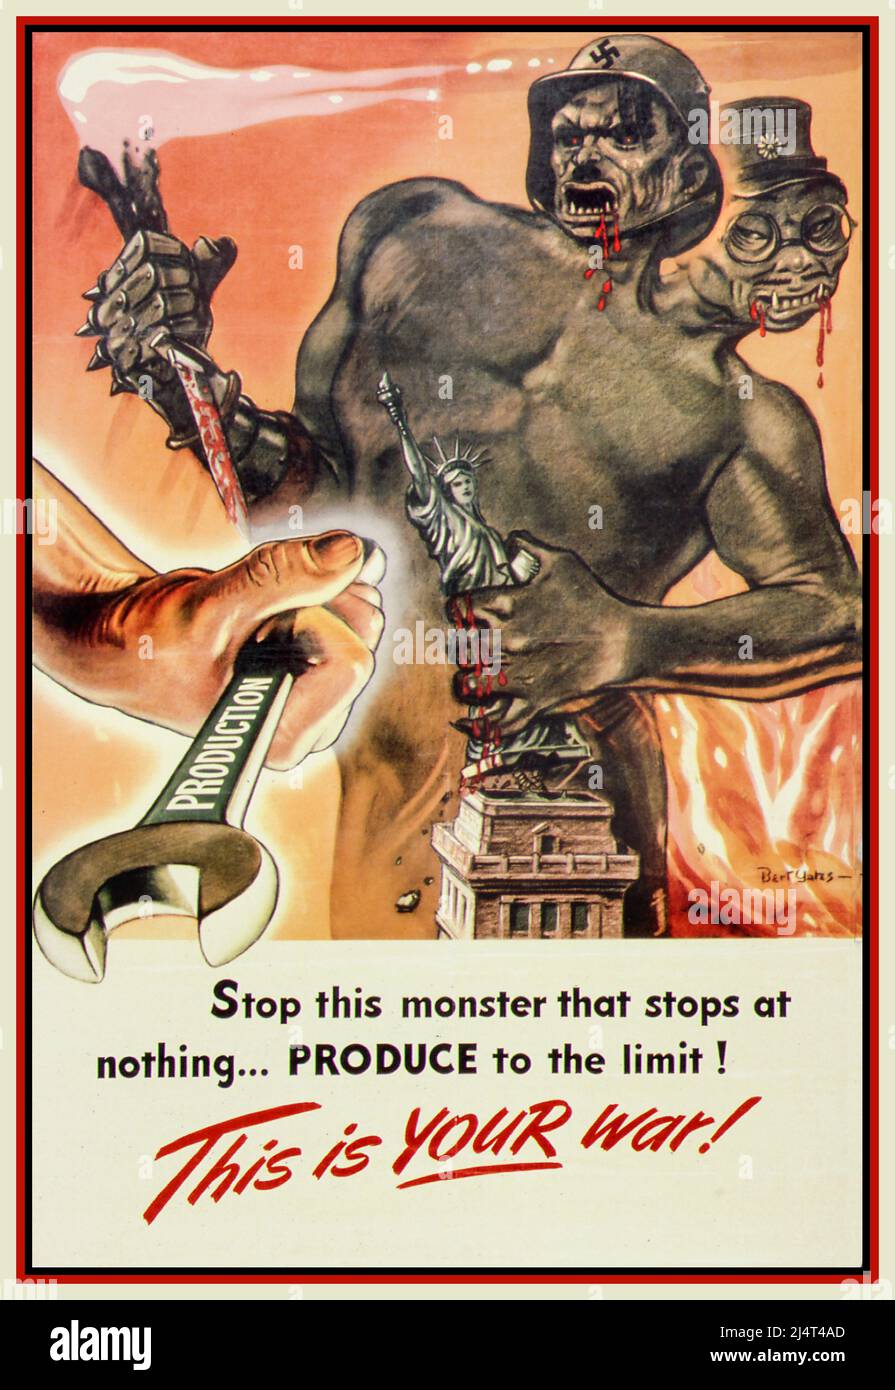 Vintage WW2 American Propaganda Poster 'Stop This Monster That Stops At Nothing... Produce to the limit ! THIS IS YOUR WAR ! Illustration of a twin headed monster of Nazi Germany Adolf Hitler and Imperial Japan Hideki Tojo, clutching at the Statue of Liberty with a demonic murdering blood lust, versus the American war production machine 1940s Stock Photo